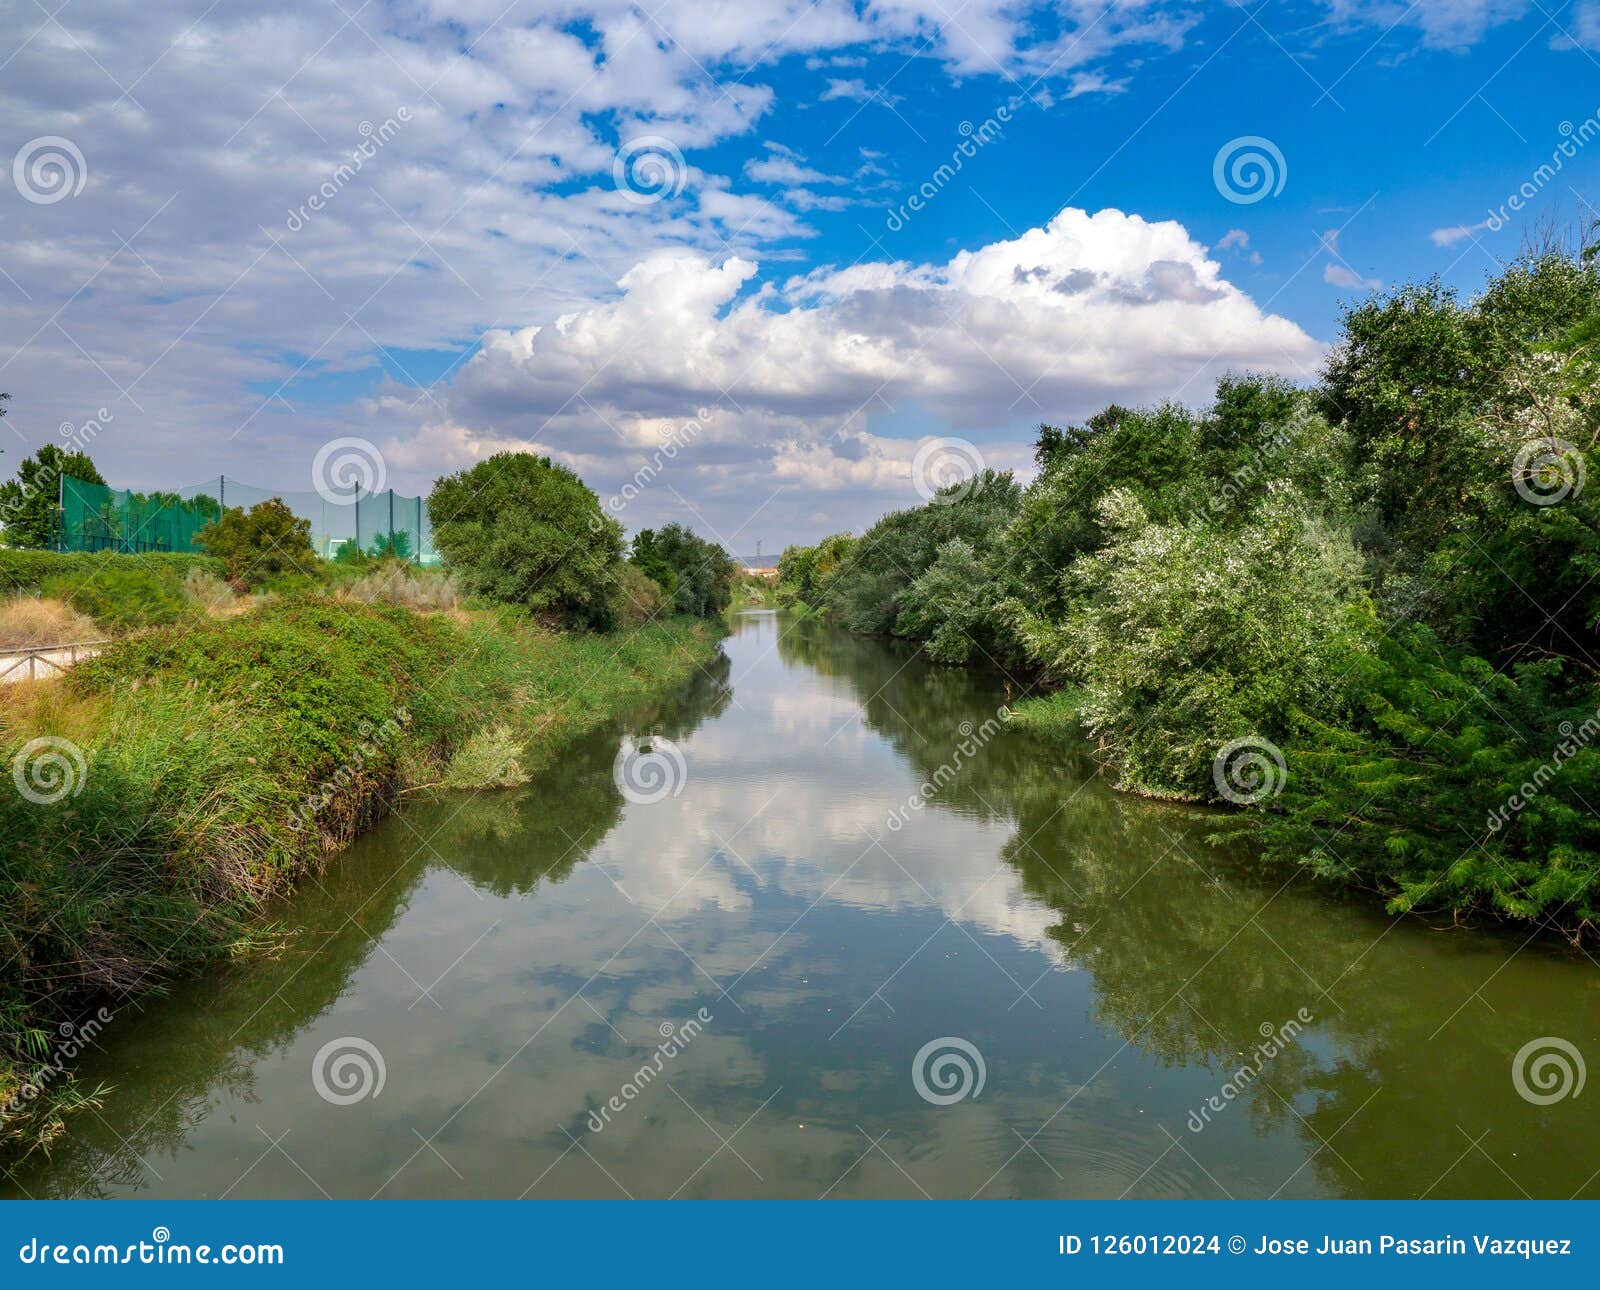 henares river on its way through the city of alcala de henares in spain with very green banks